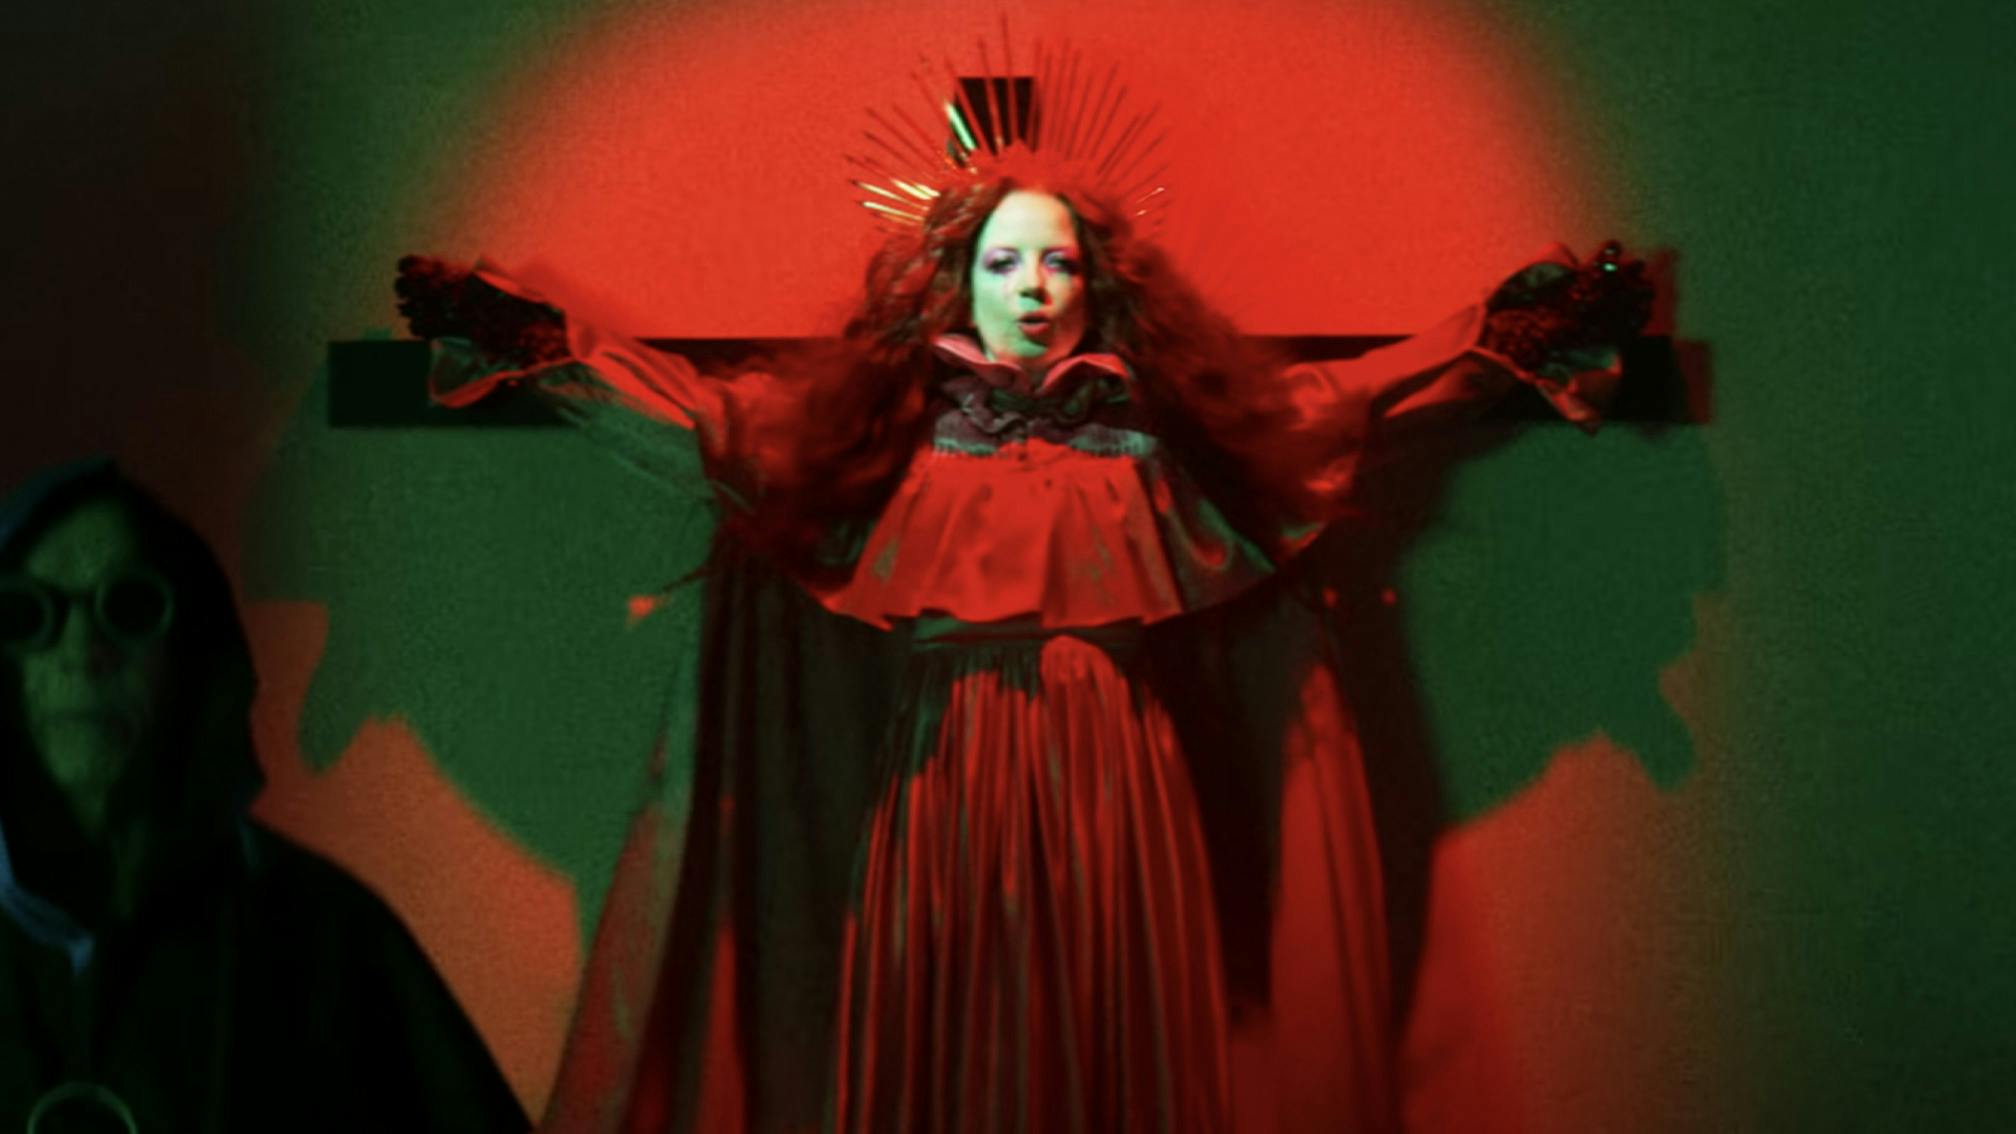 Watch the video for Garbage's new single, No Gods No Masters